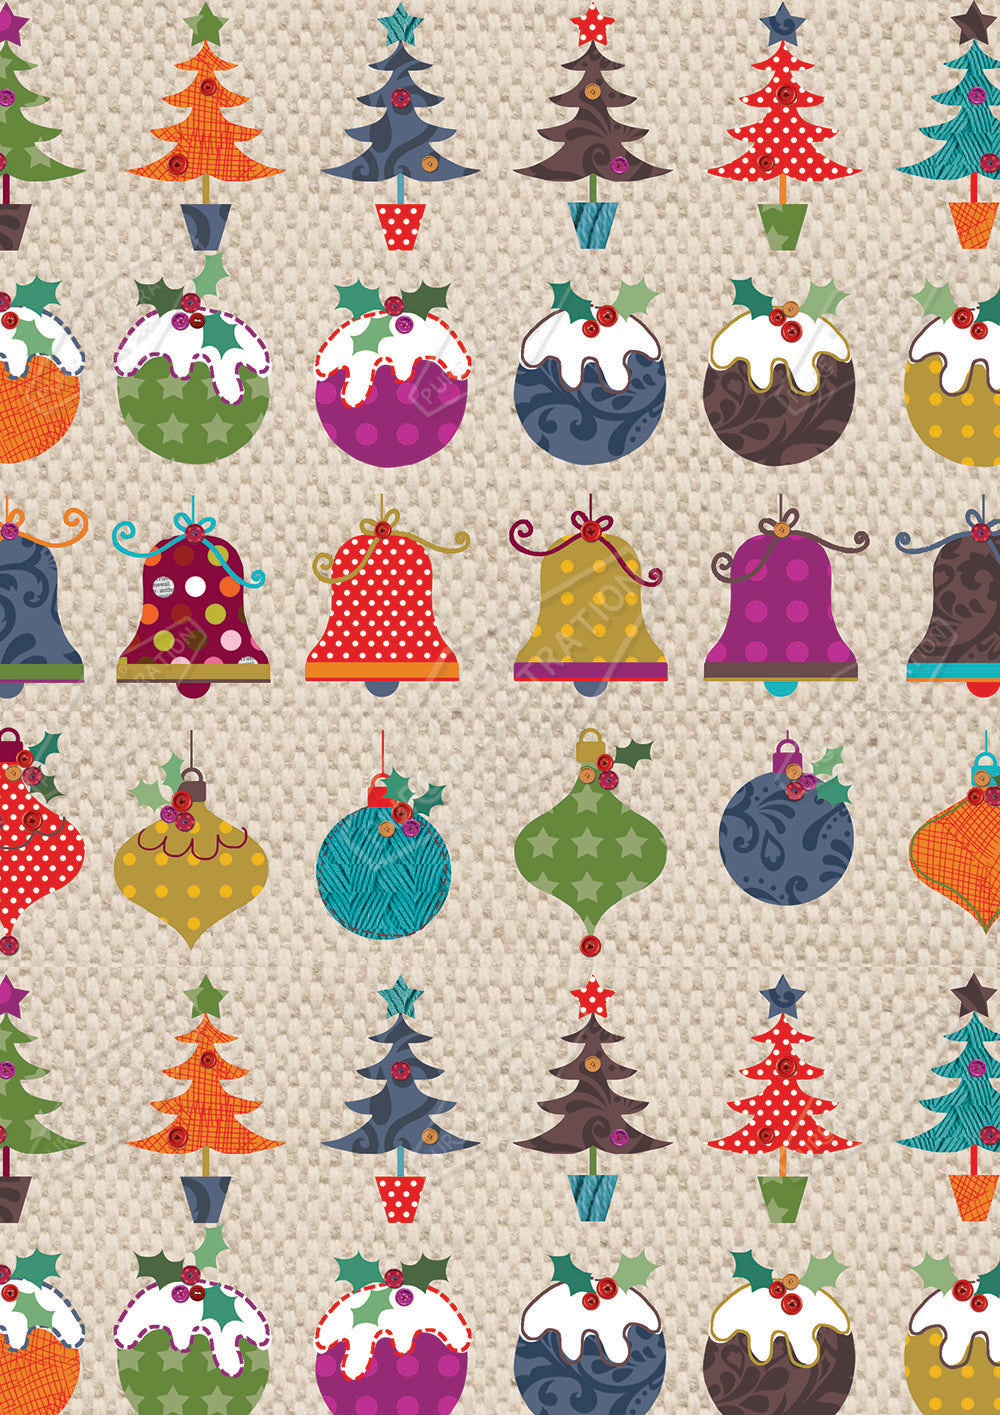 00032204KSP- Kerry Spurling is represented by Pure Art Licensing Agency - Christmas Pattern Design